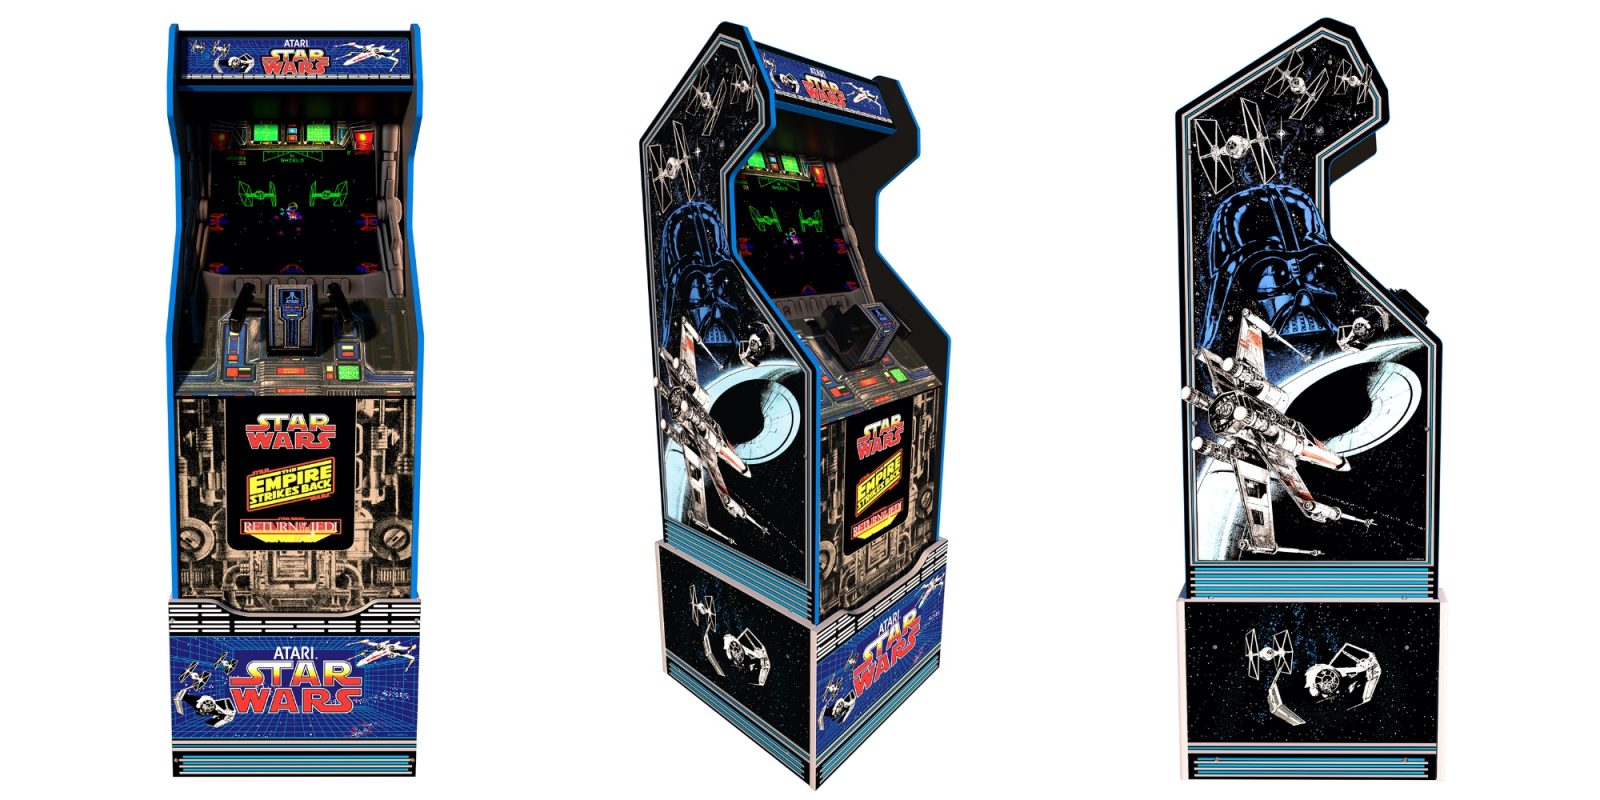 Arcade1up S Star Wars Golden Tee Cabinets Drop To All Time Lows